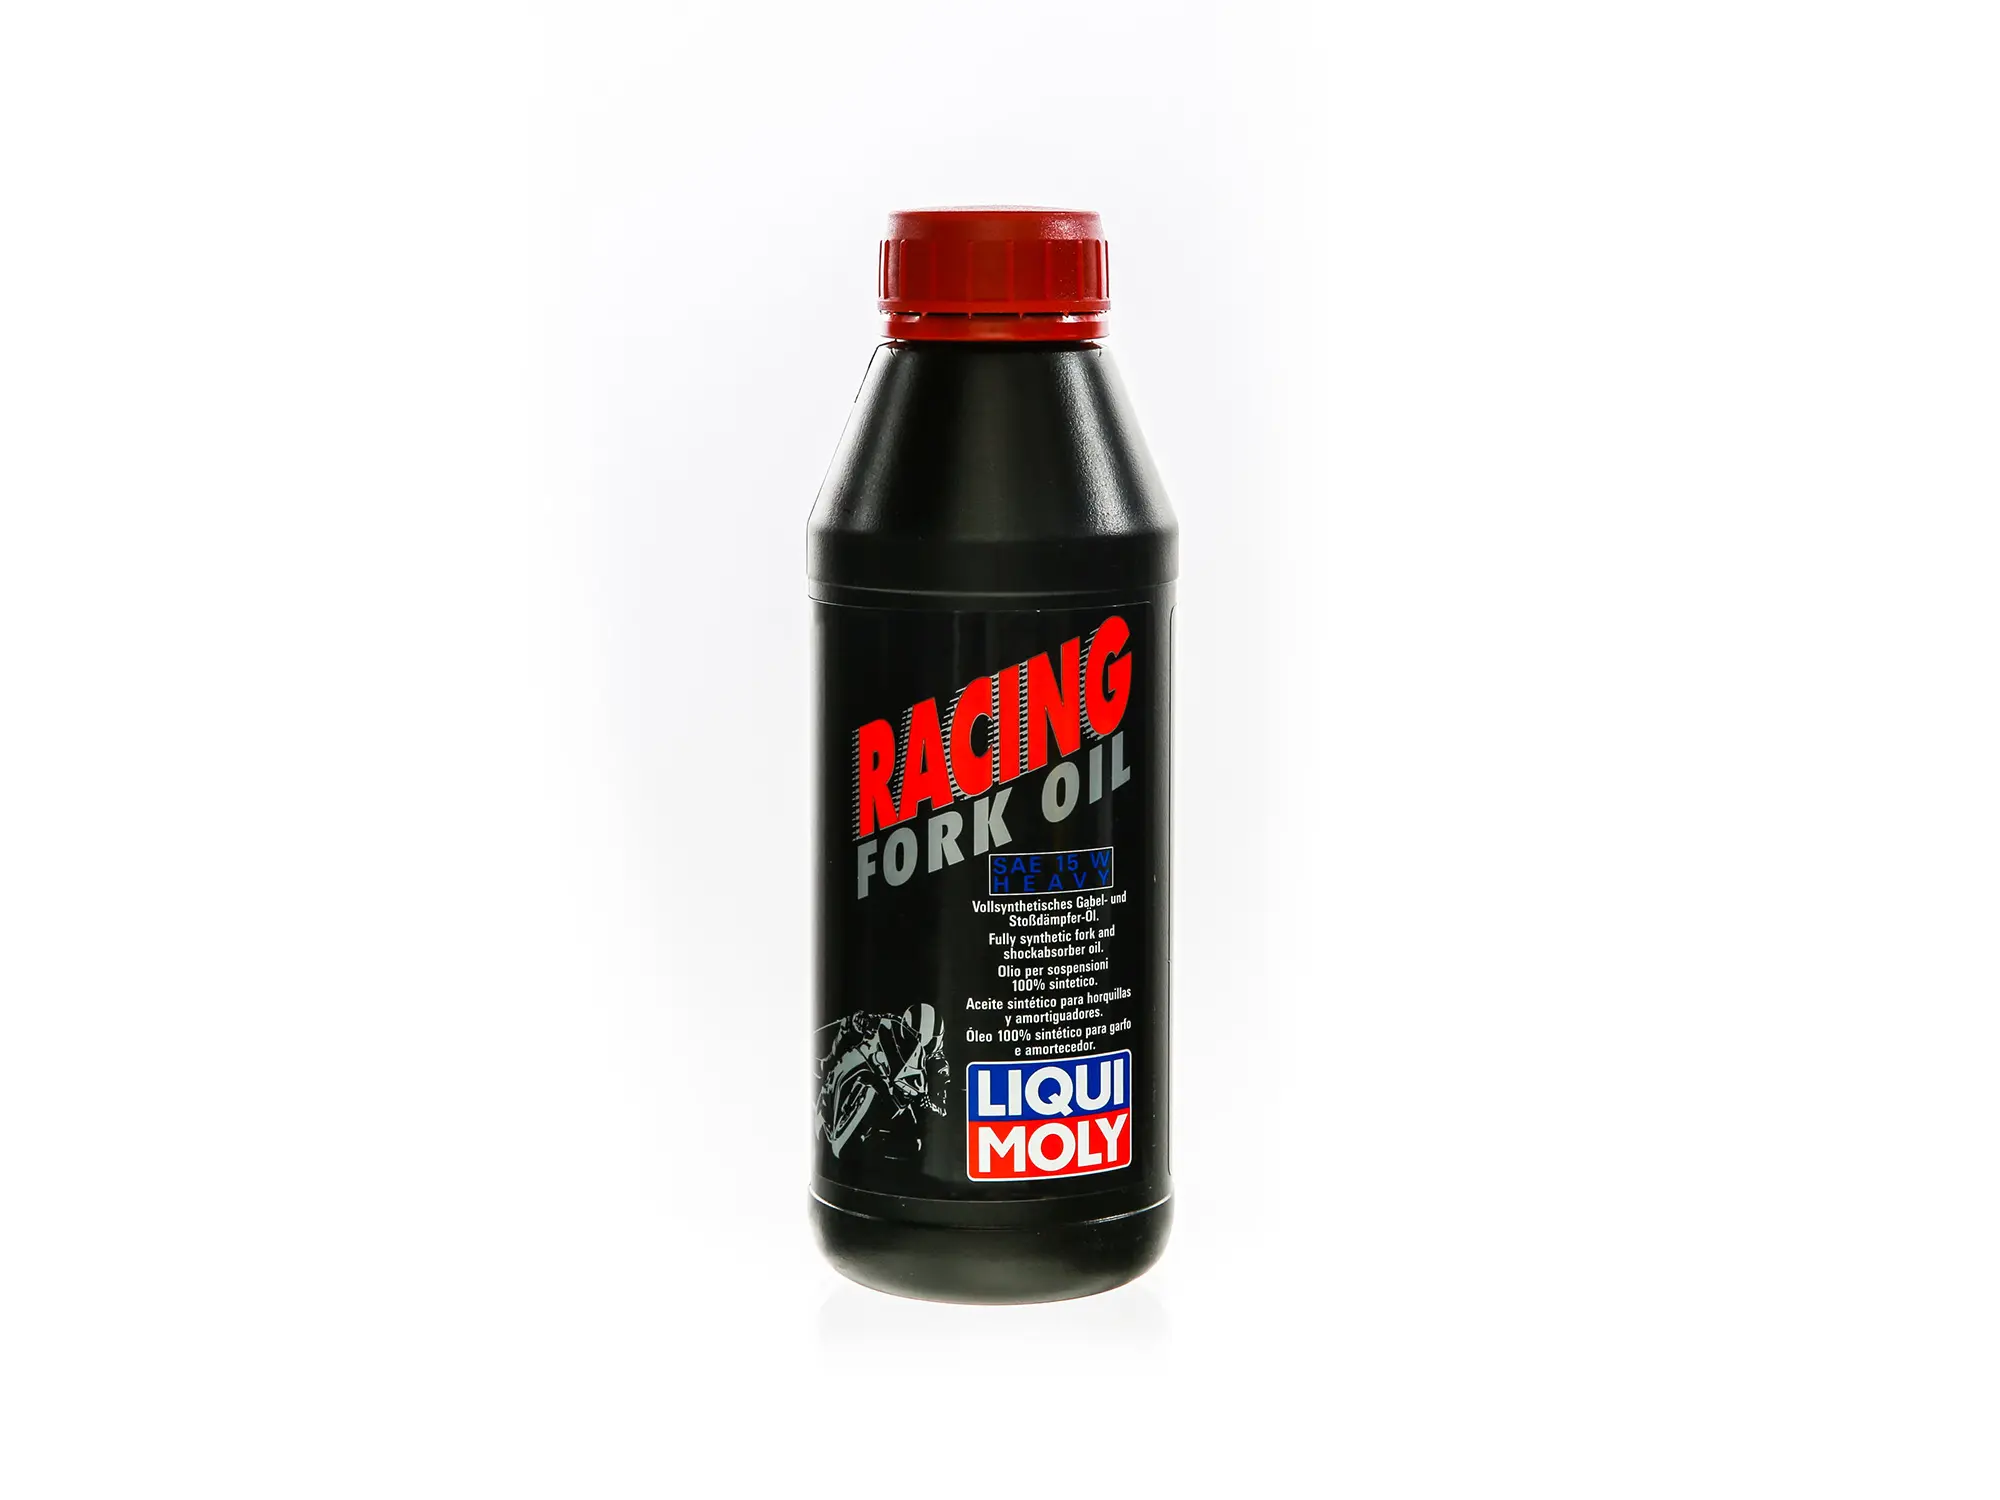 Fork and shock absorber oil 0.5 litre Liqui Moly* (SAE15W), Item no: 10055357 - Image 1